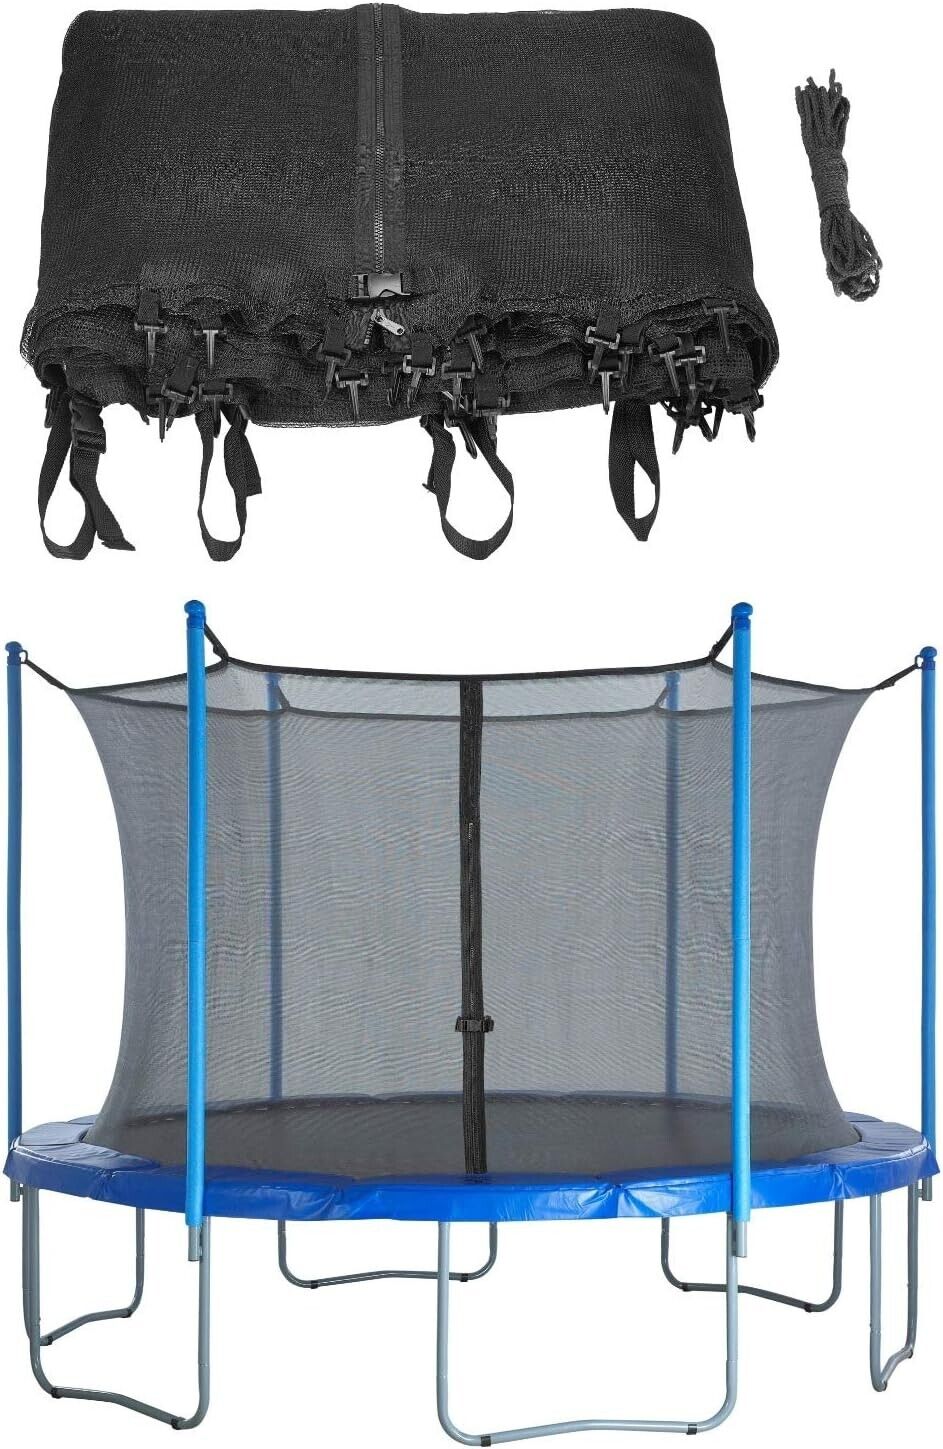 Upper Bounce Trampoline Safety Enclosure Net For 13 FT Round Frame UBNET 13-8-IS